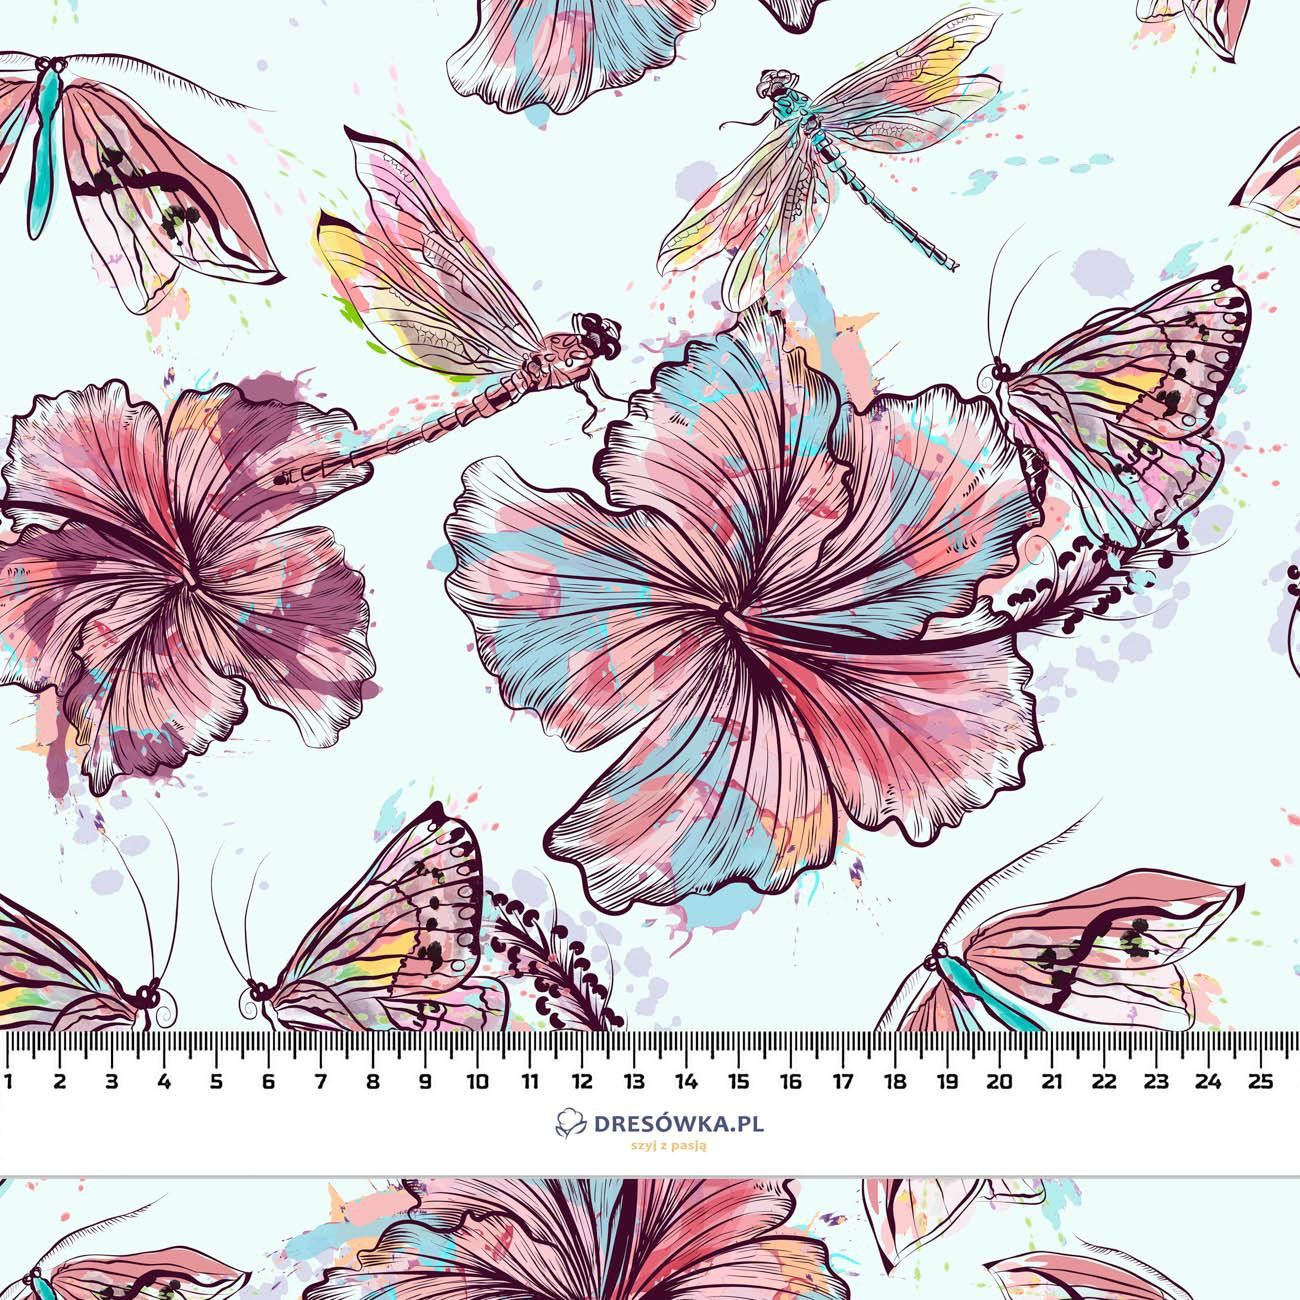 HIBISCUS AND BUTTERFLIES - Cotton woven fabric